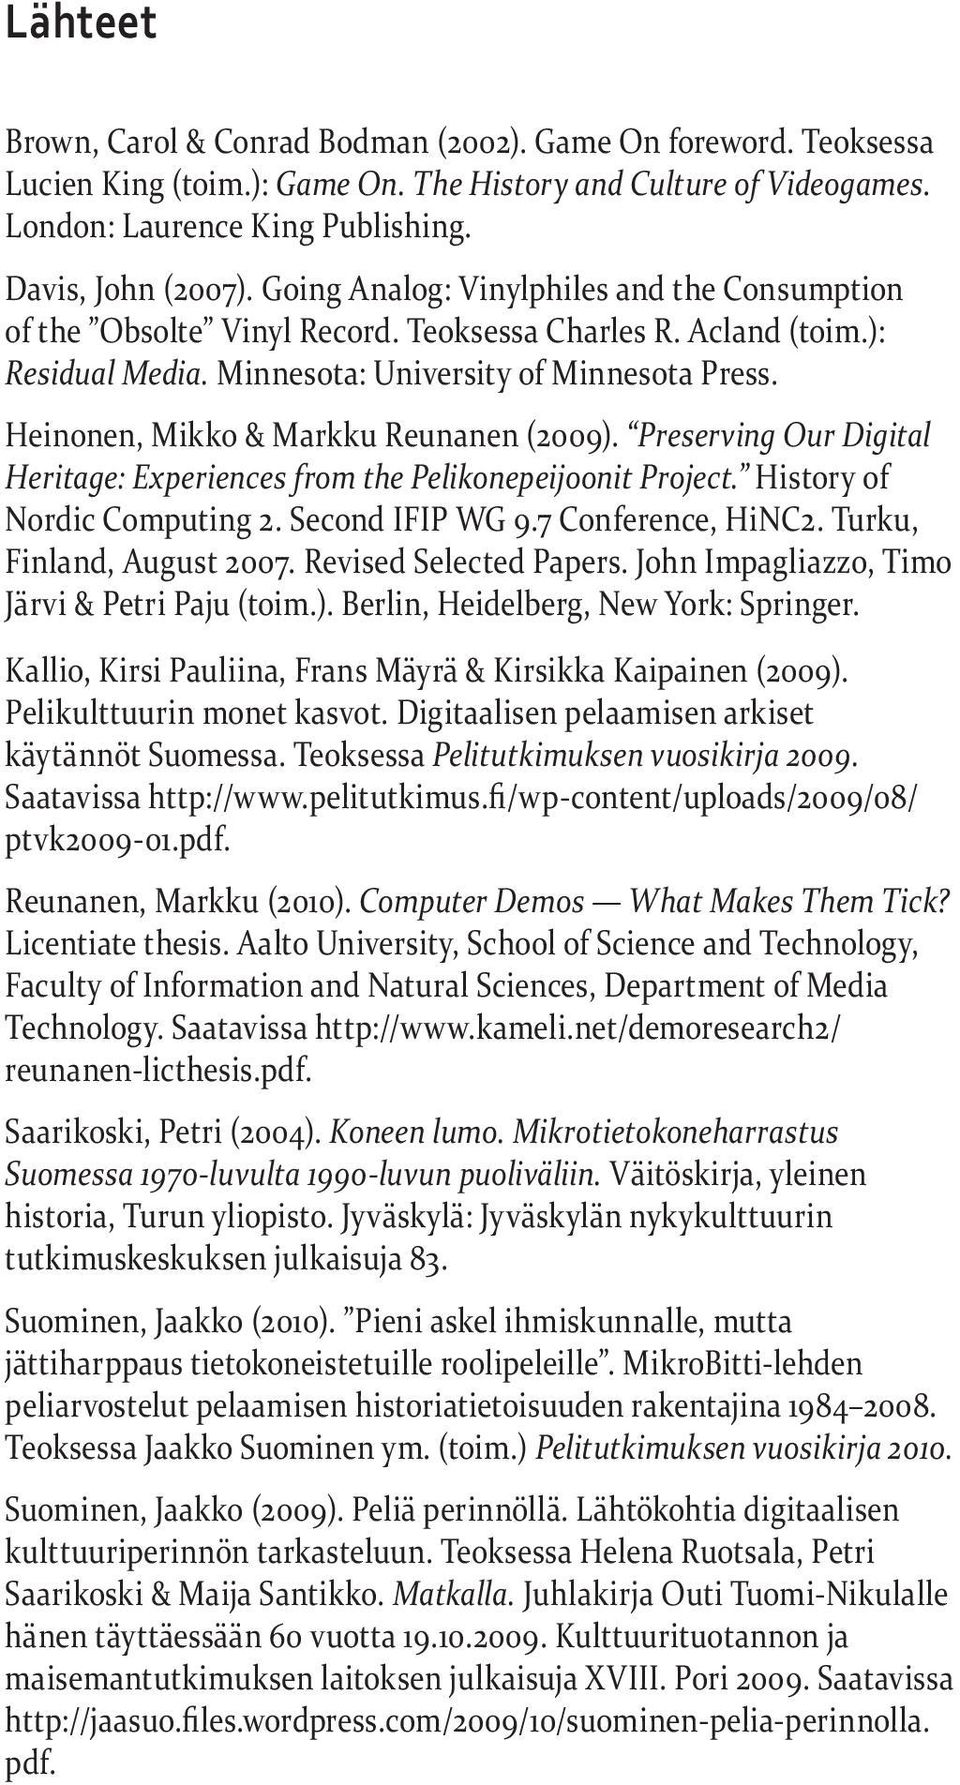 Heinonen, Mikko & Markku Reunanen (2009). Preserving Our Digital Heritage: Experiences from the Pelikonepeijoonit Project. History of Nordic Computing 2. Second IFIP WG 9.7 Conference, HiNC2.